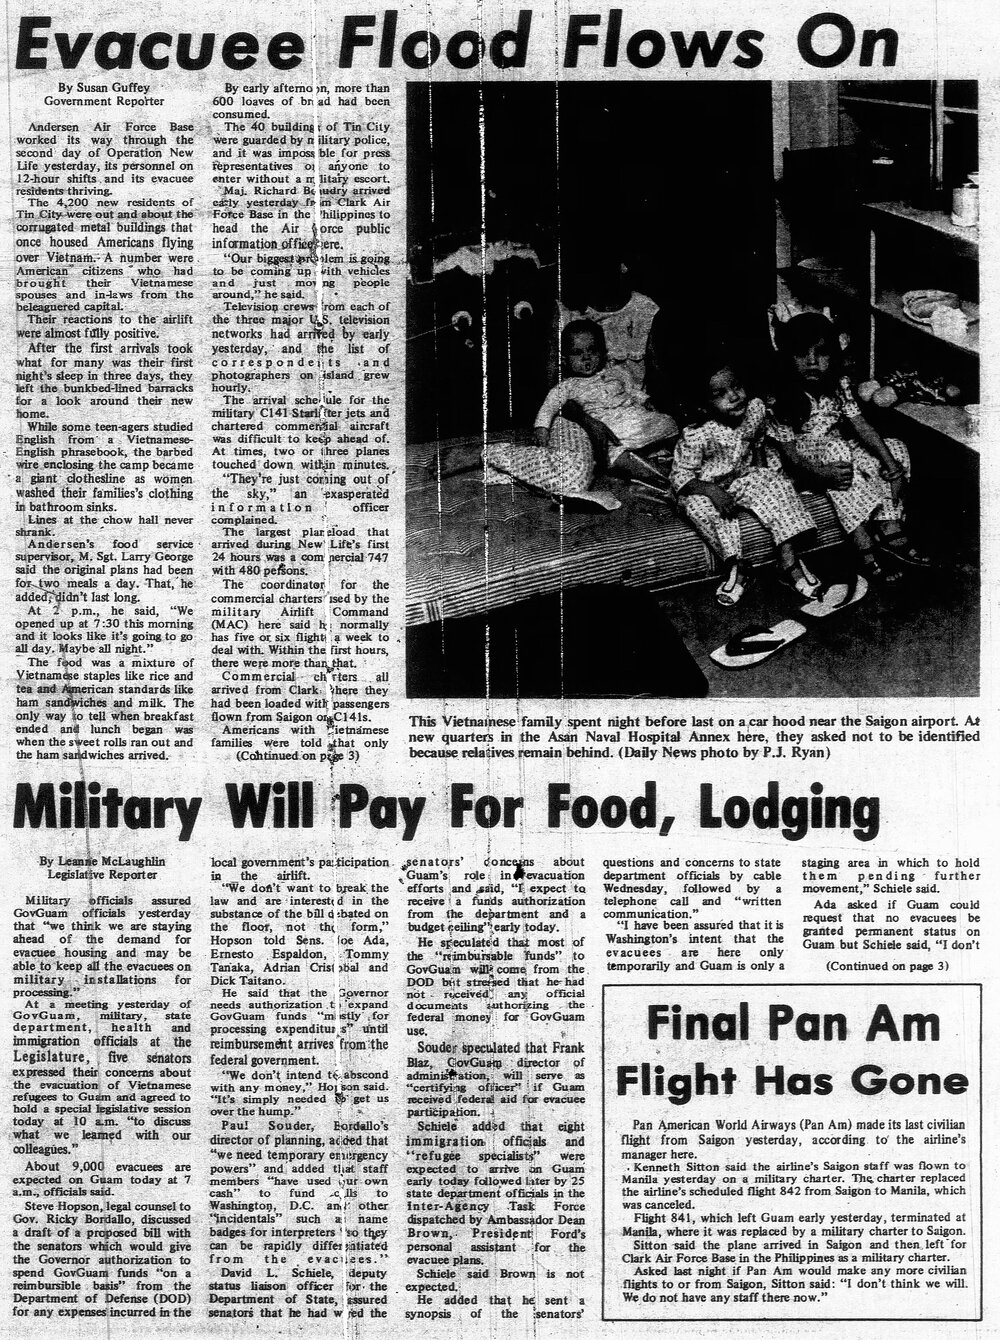 Pacific Daily News_Apr 25, 1975_Pg.1